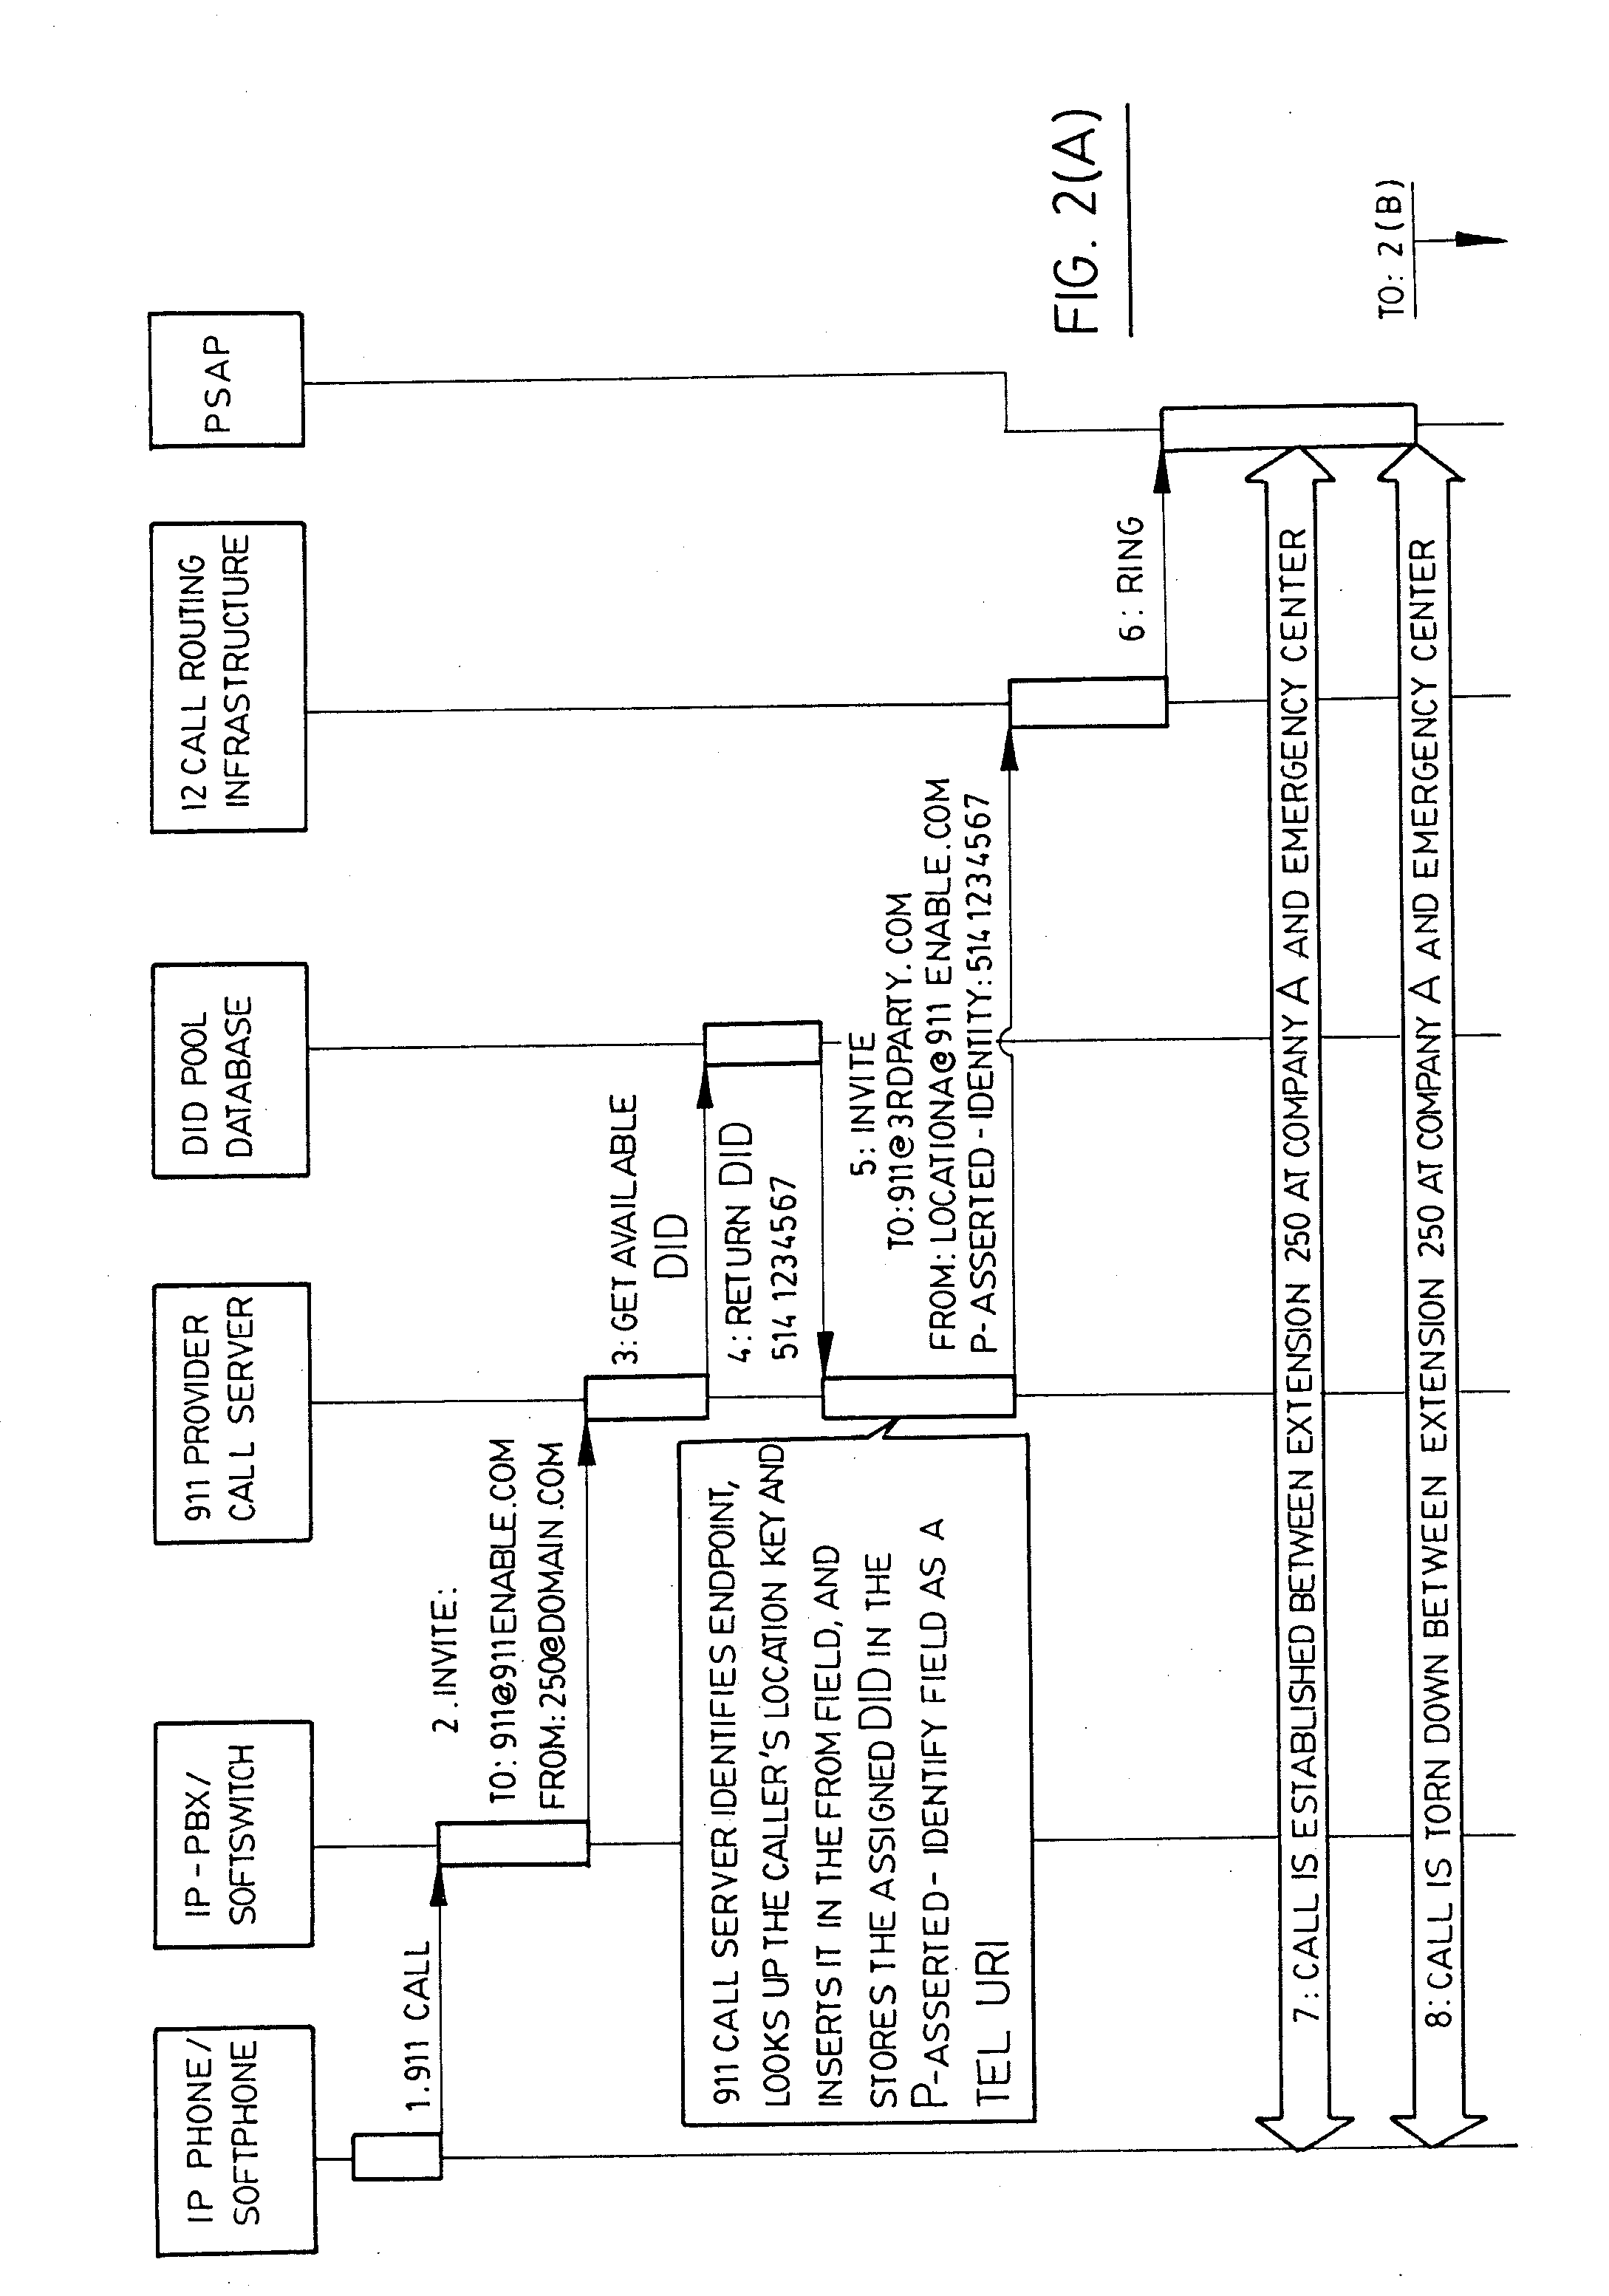 System and method for delivering callback numbers for emergency calls in a VOIP system